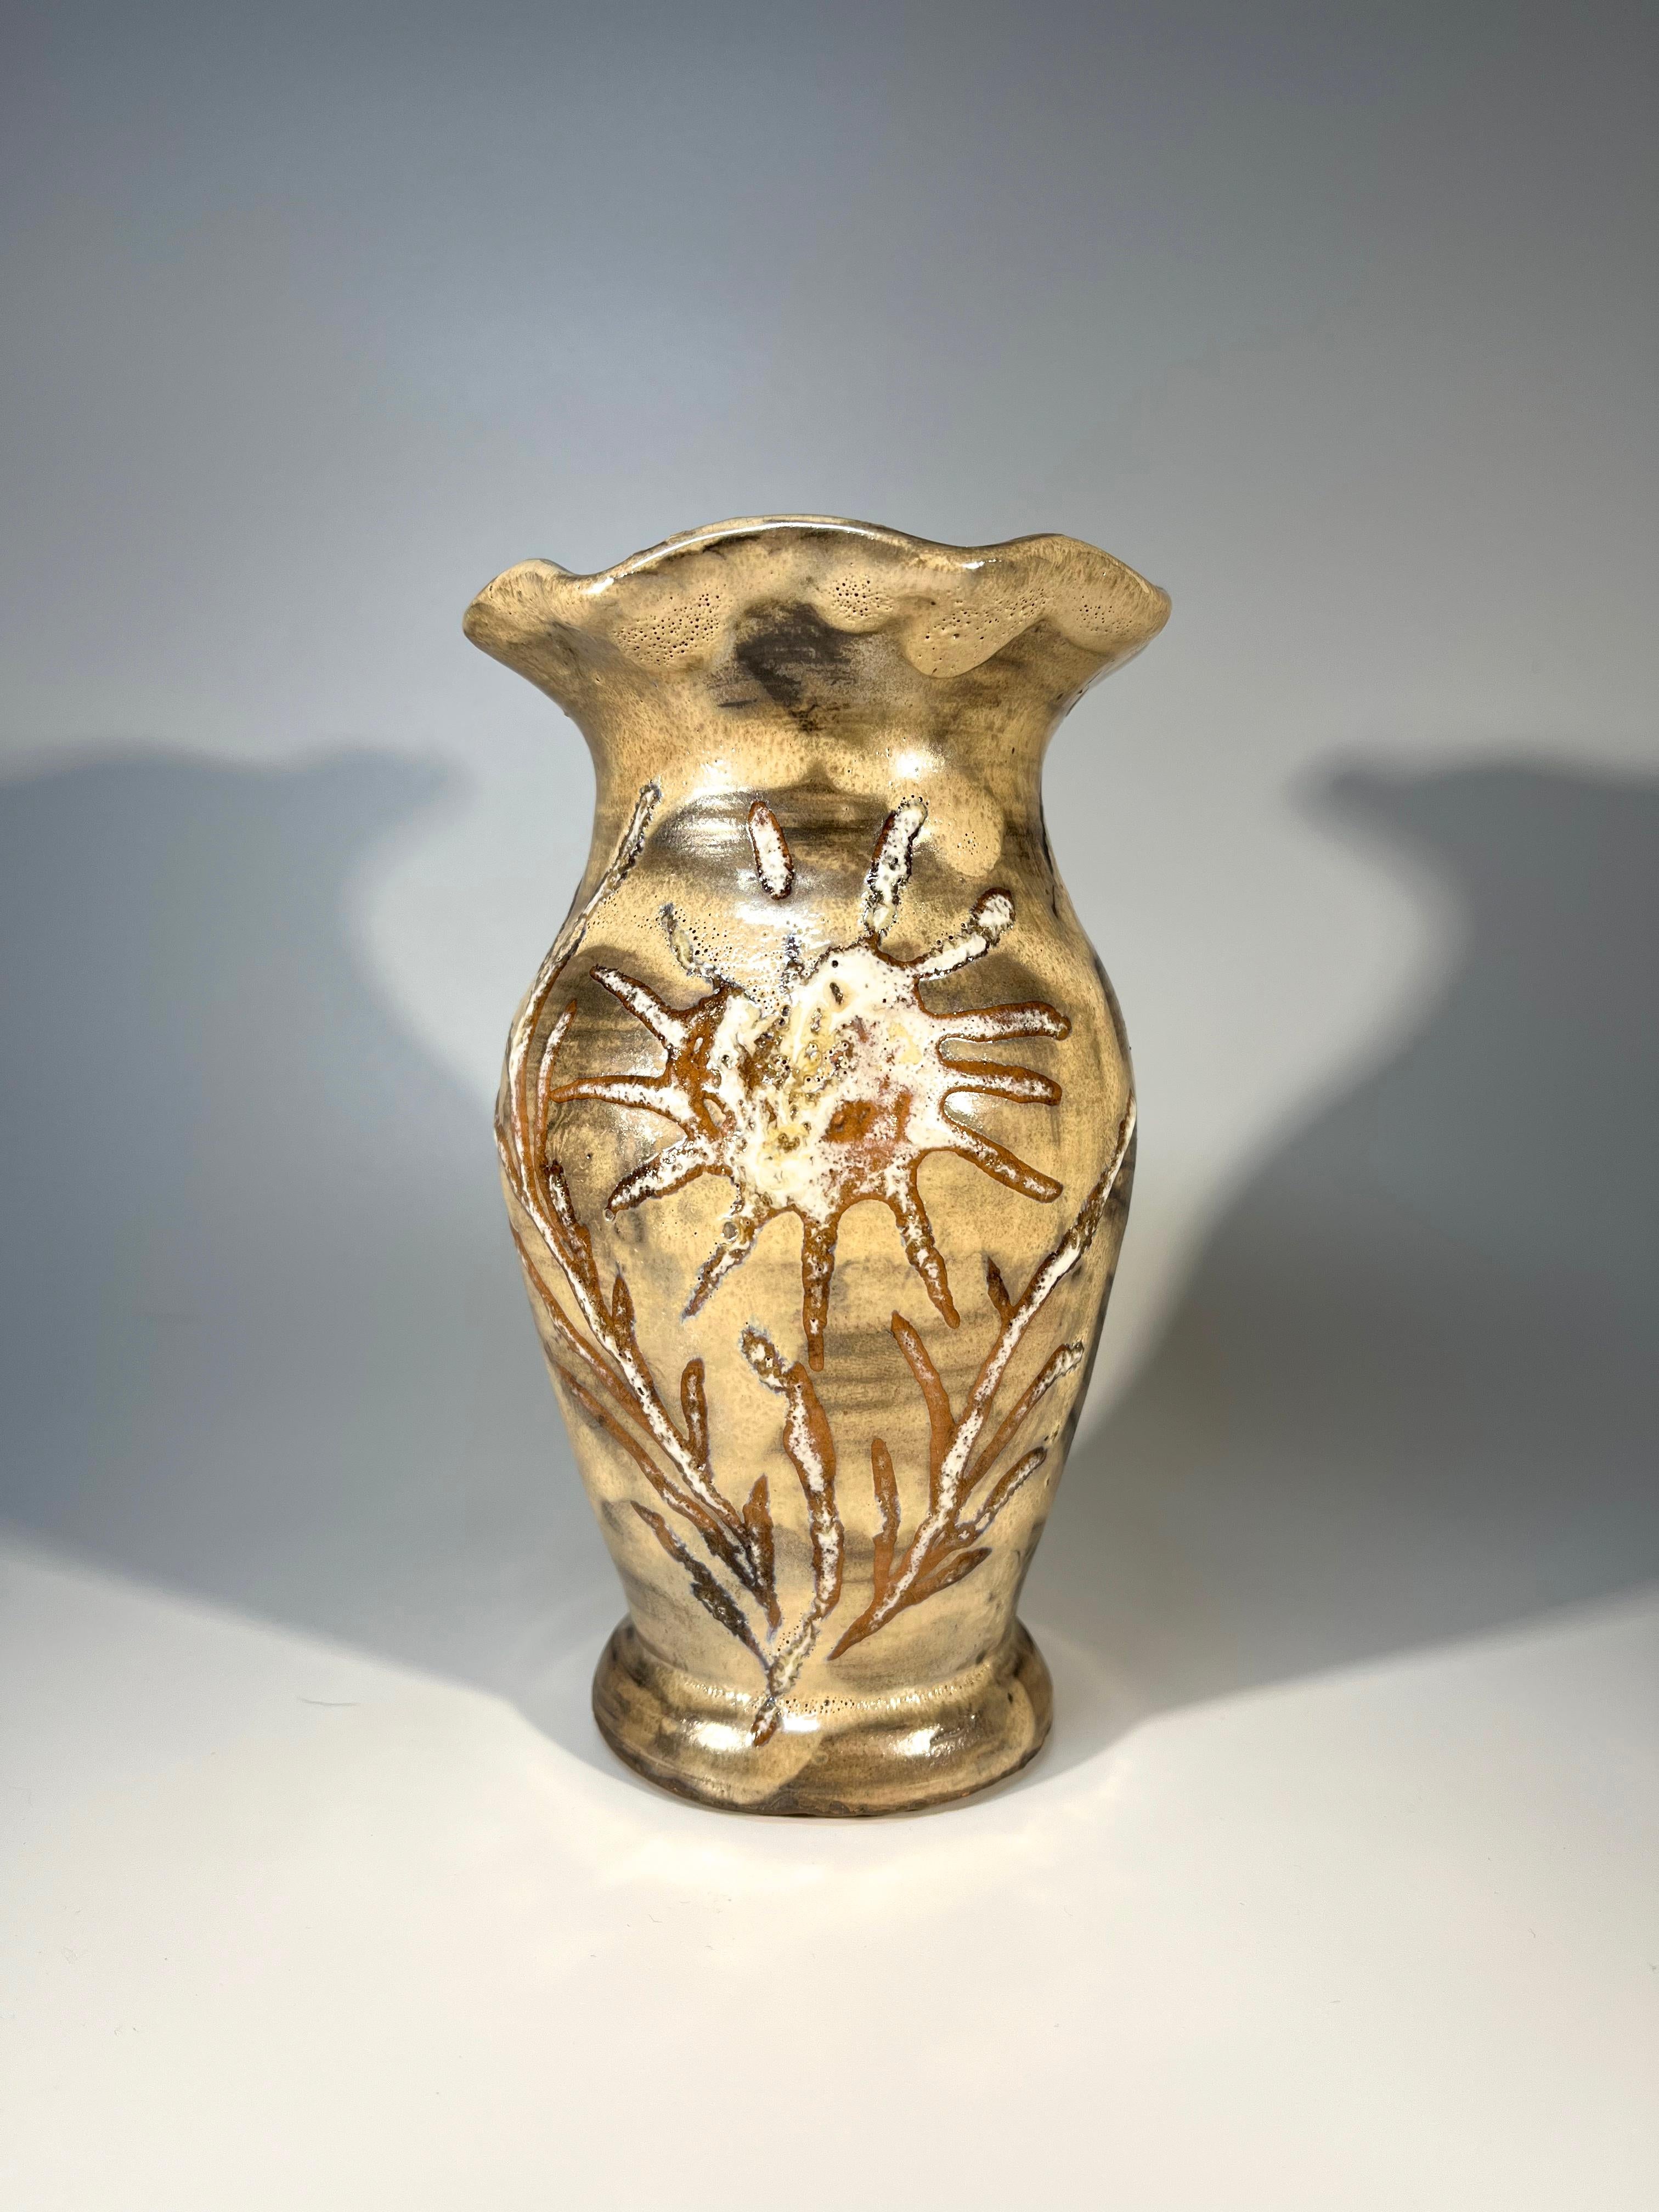 Extraordinary lustre glazed ceramic vase from Vallauris, France
Fascinating textures, patterning and artistry
Circa 1970's
Signed Vallauris  to base
Height 6.5 inch, Diameter 4 inch, 
Excellent condition
Wear consistent with age and use